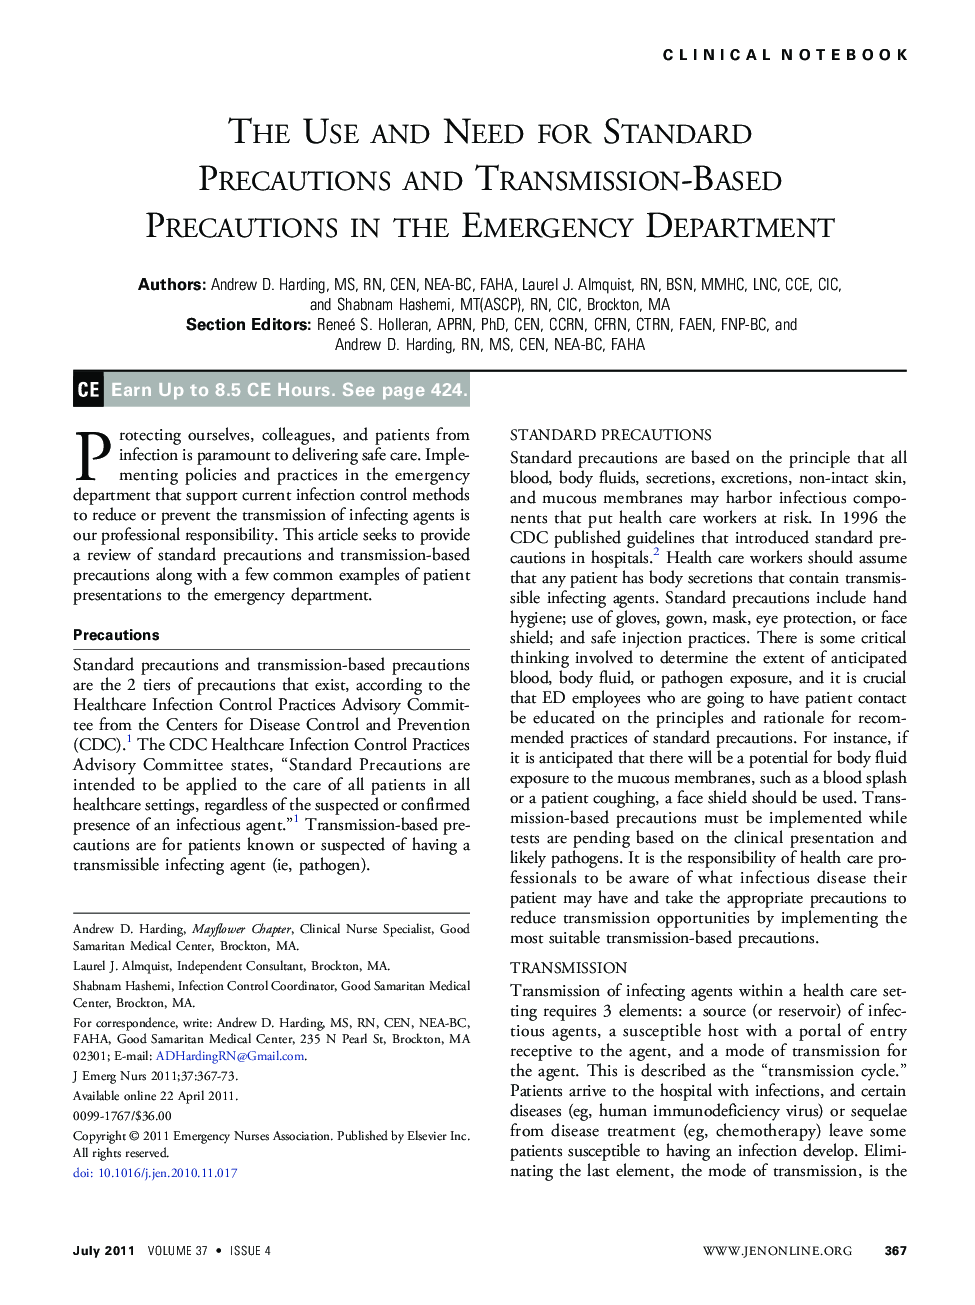 The Use and Need for Standard Precautions and Transmission-Based Precautions in the Emergency Department